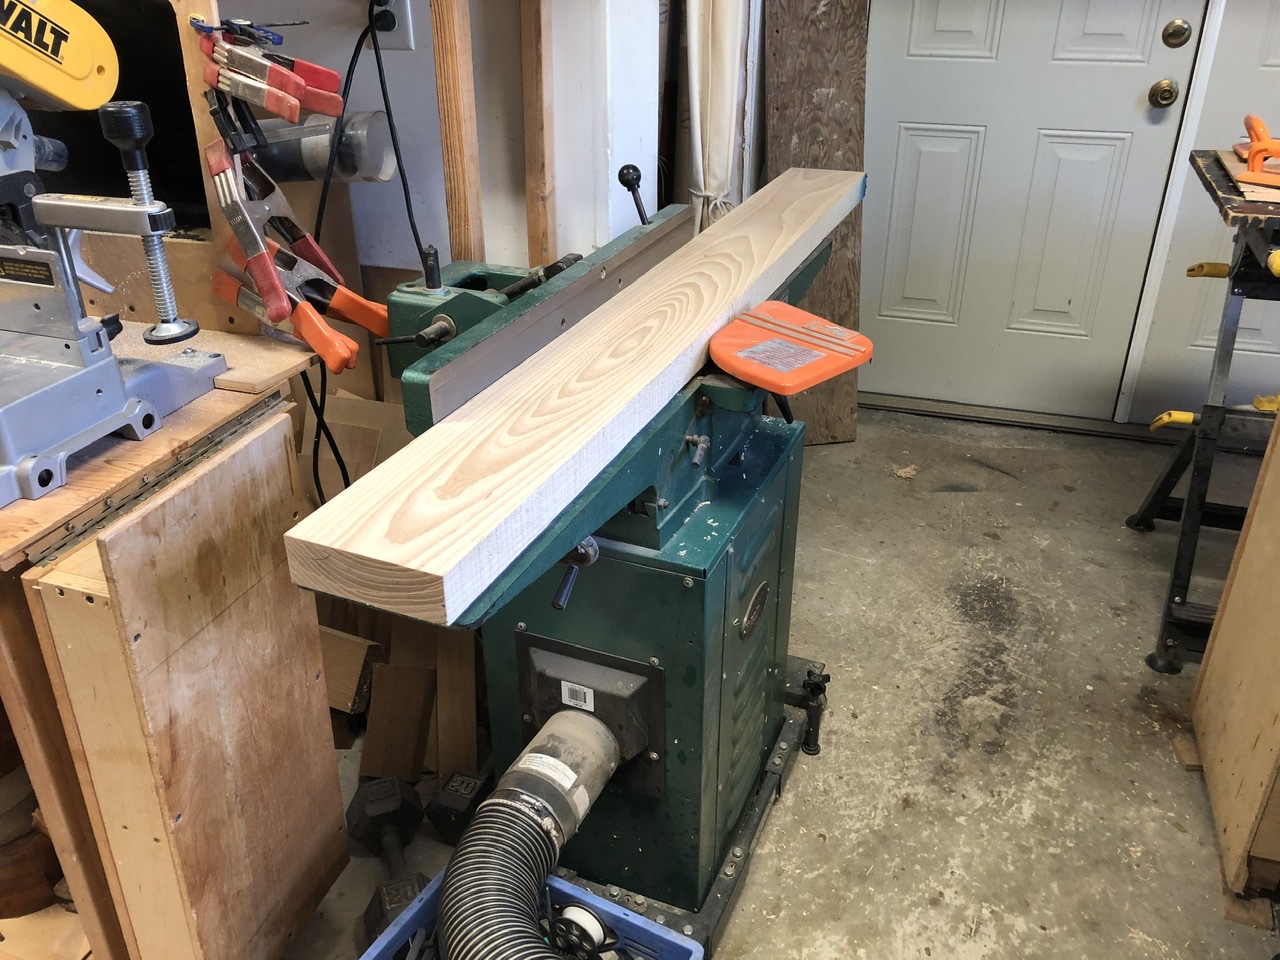 The 5' plank run over the jointer. This is a staged photo after I milled it. But, it depicts the milling process.